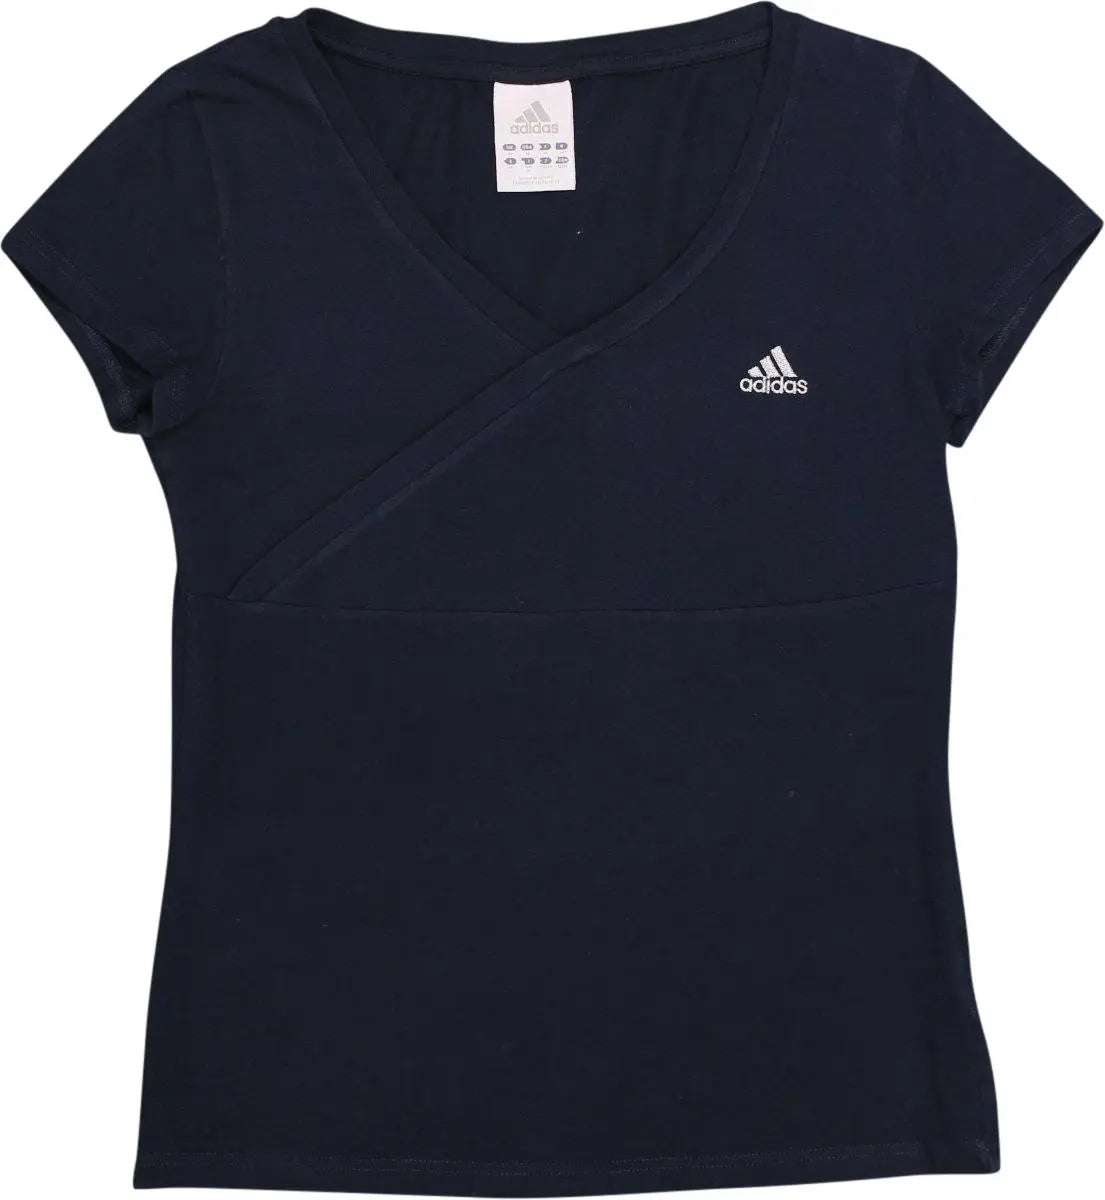 Adidas - Blue T-shirt by Adidas- ThriftTale.com - Vintage and second handclothing